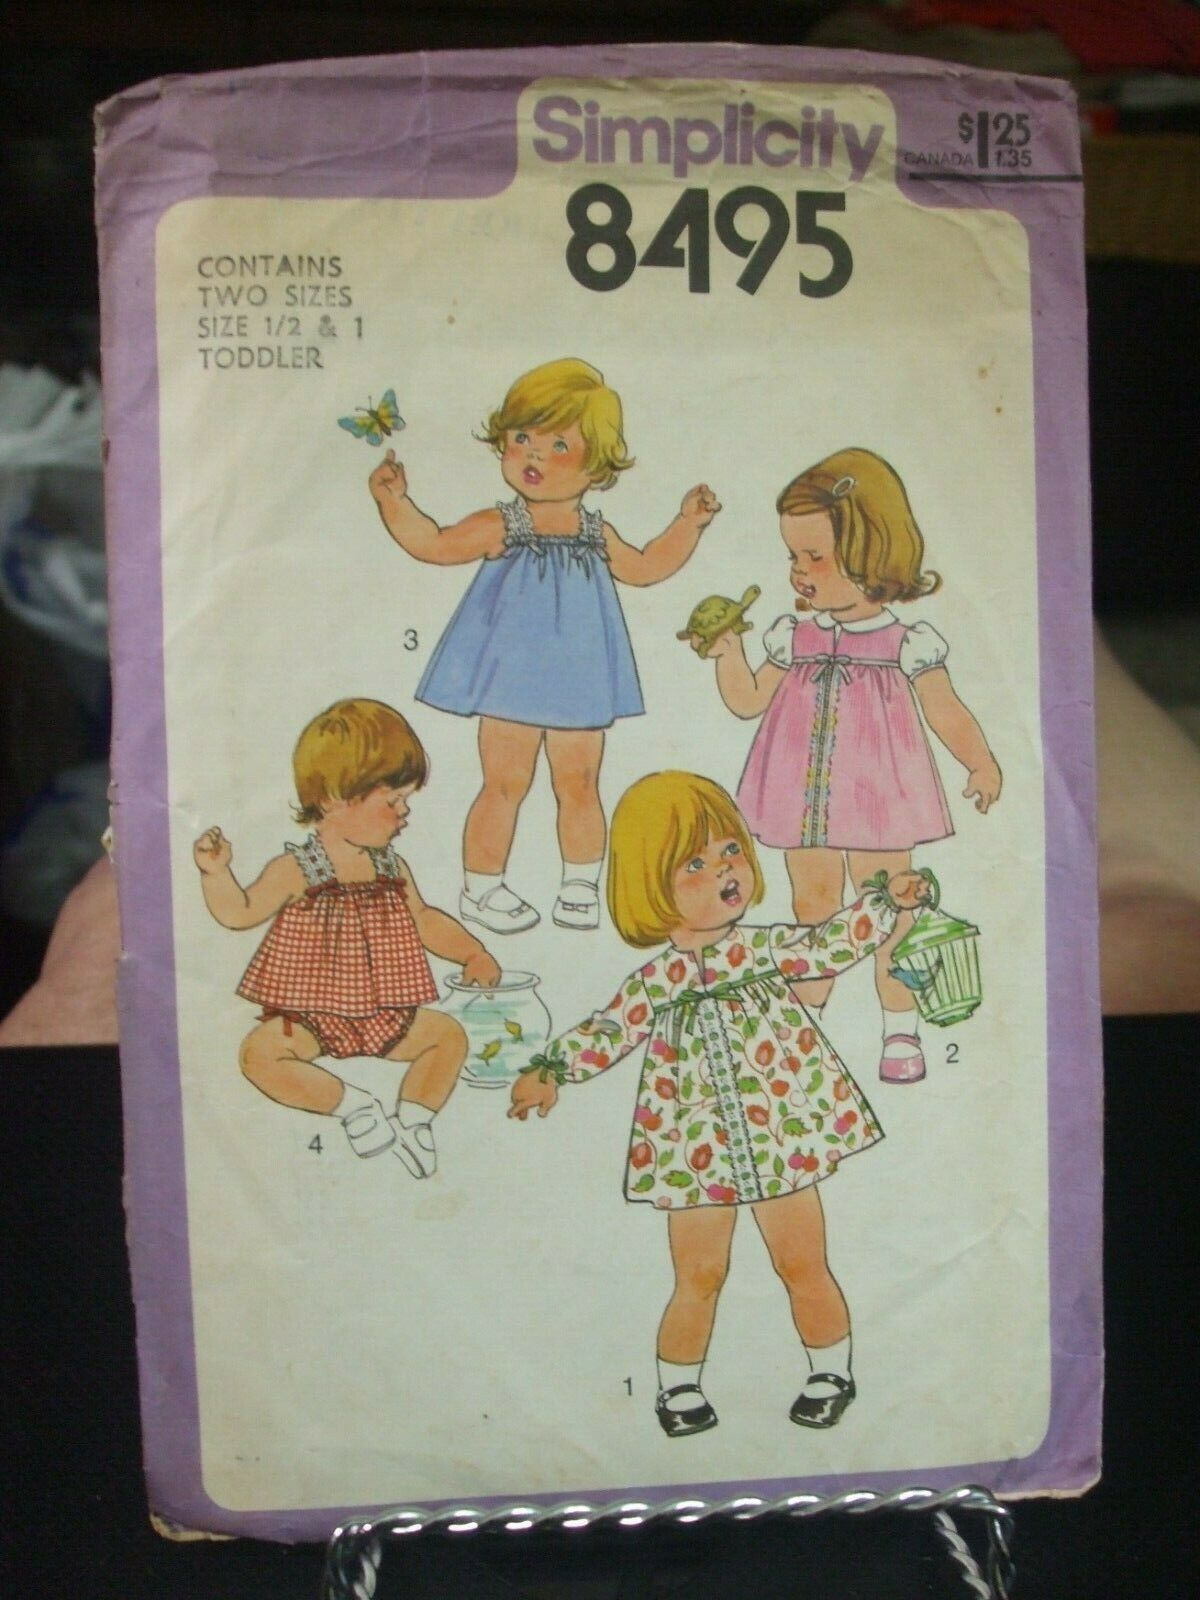 Primary image for Simplicity 8495 Dress, Jumper, Sundress or Top & Panties Pattern - Size 1/2 & 1